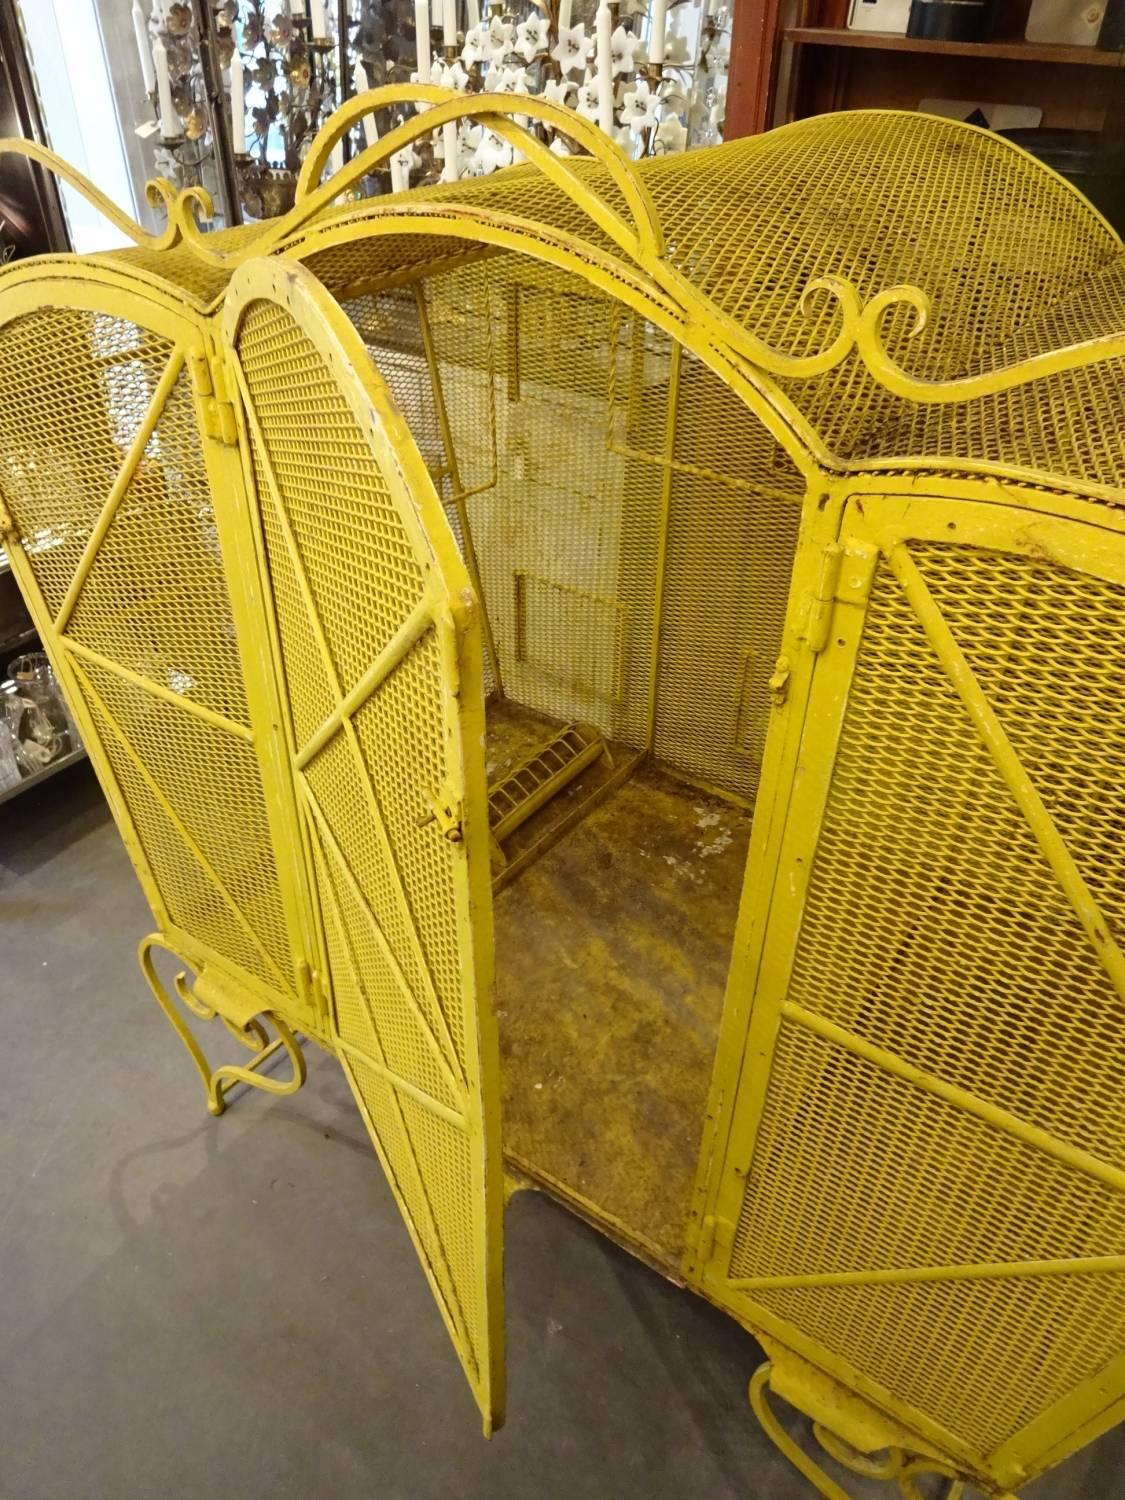 Other Stunning French Coloured Birdcage Display Piece